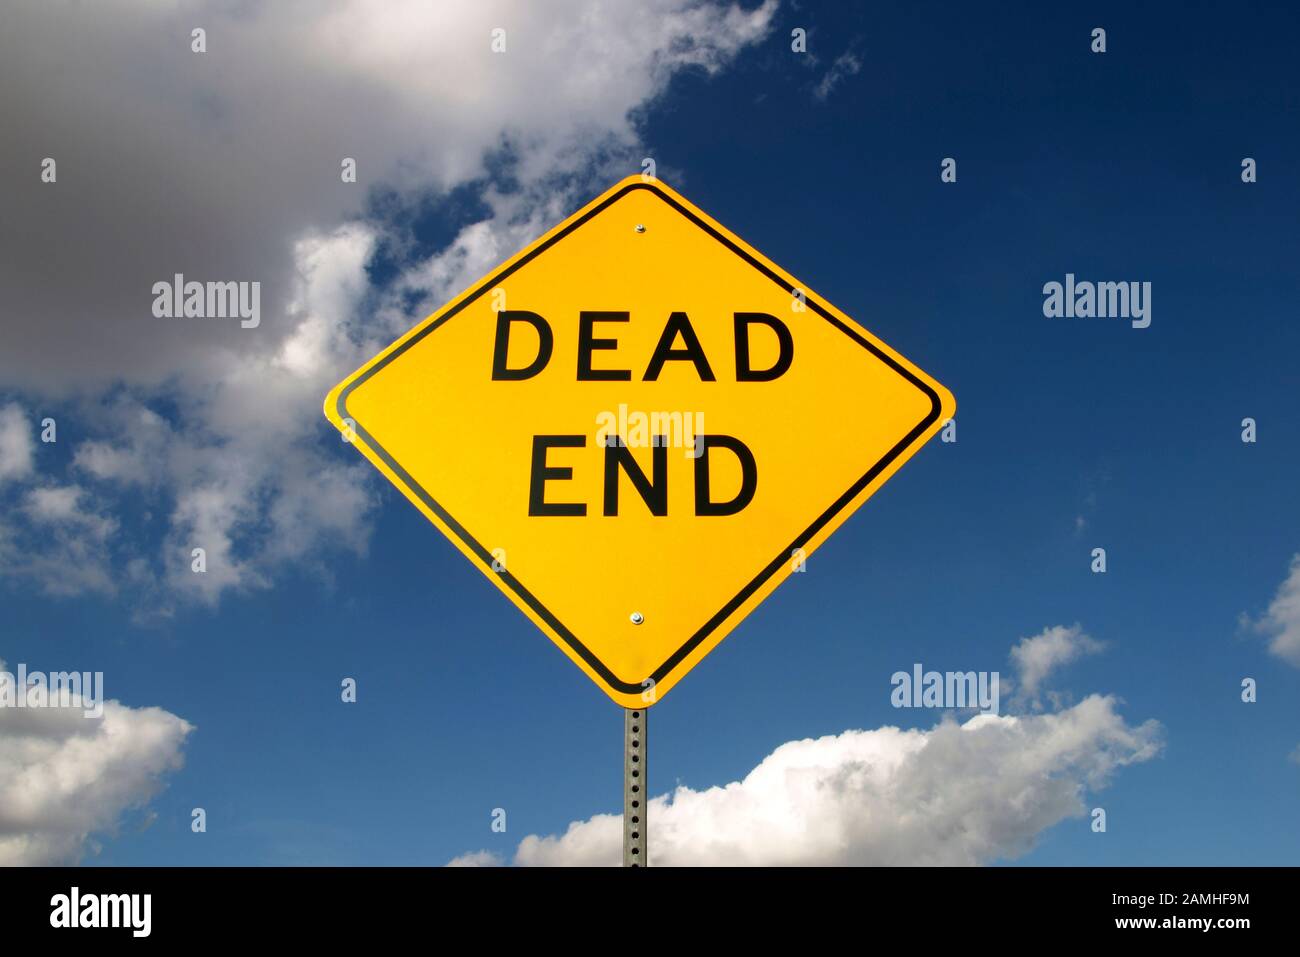 Dead end sign with blue sky and clouds behind Stock Photo